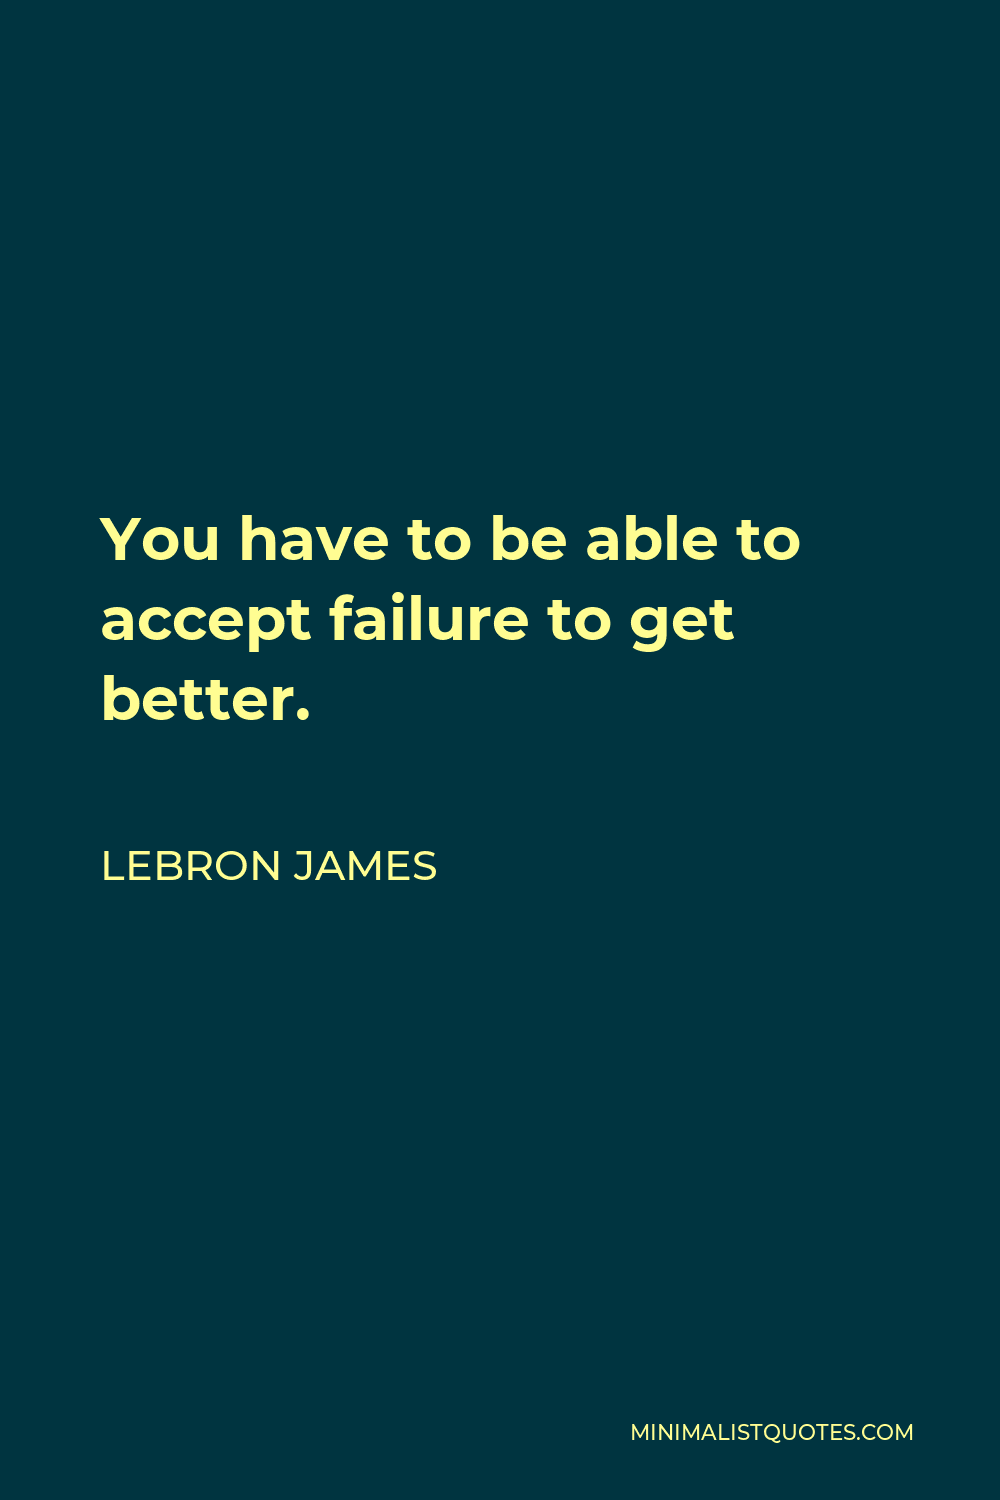 LeBron James Quote - You have to be able to accept failure to get better.